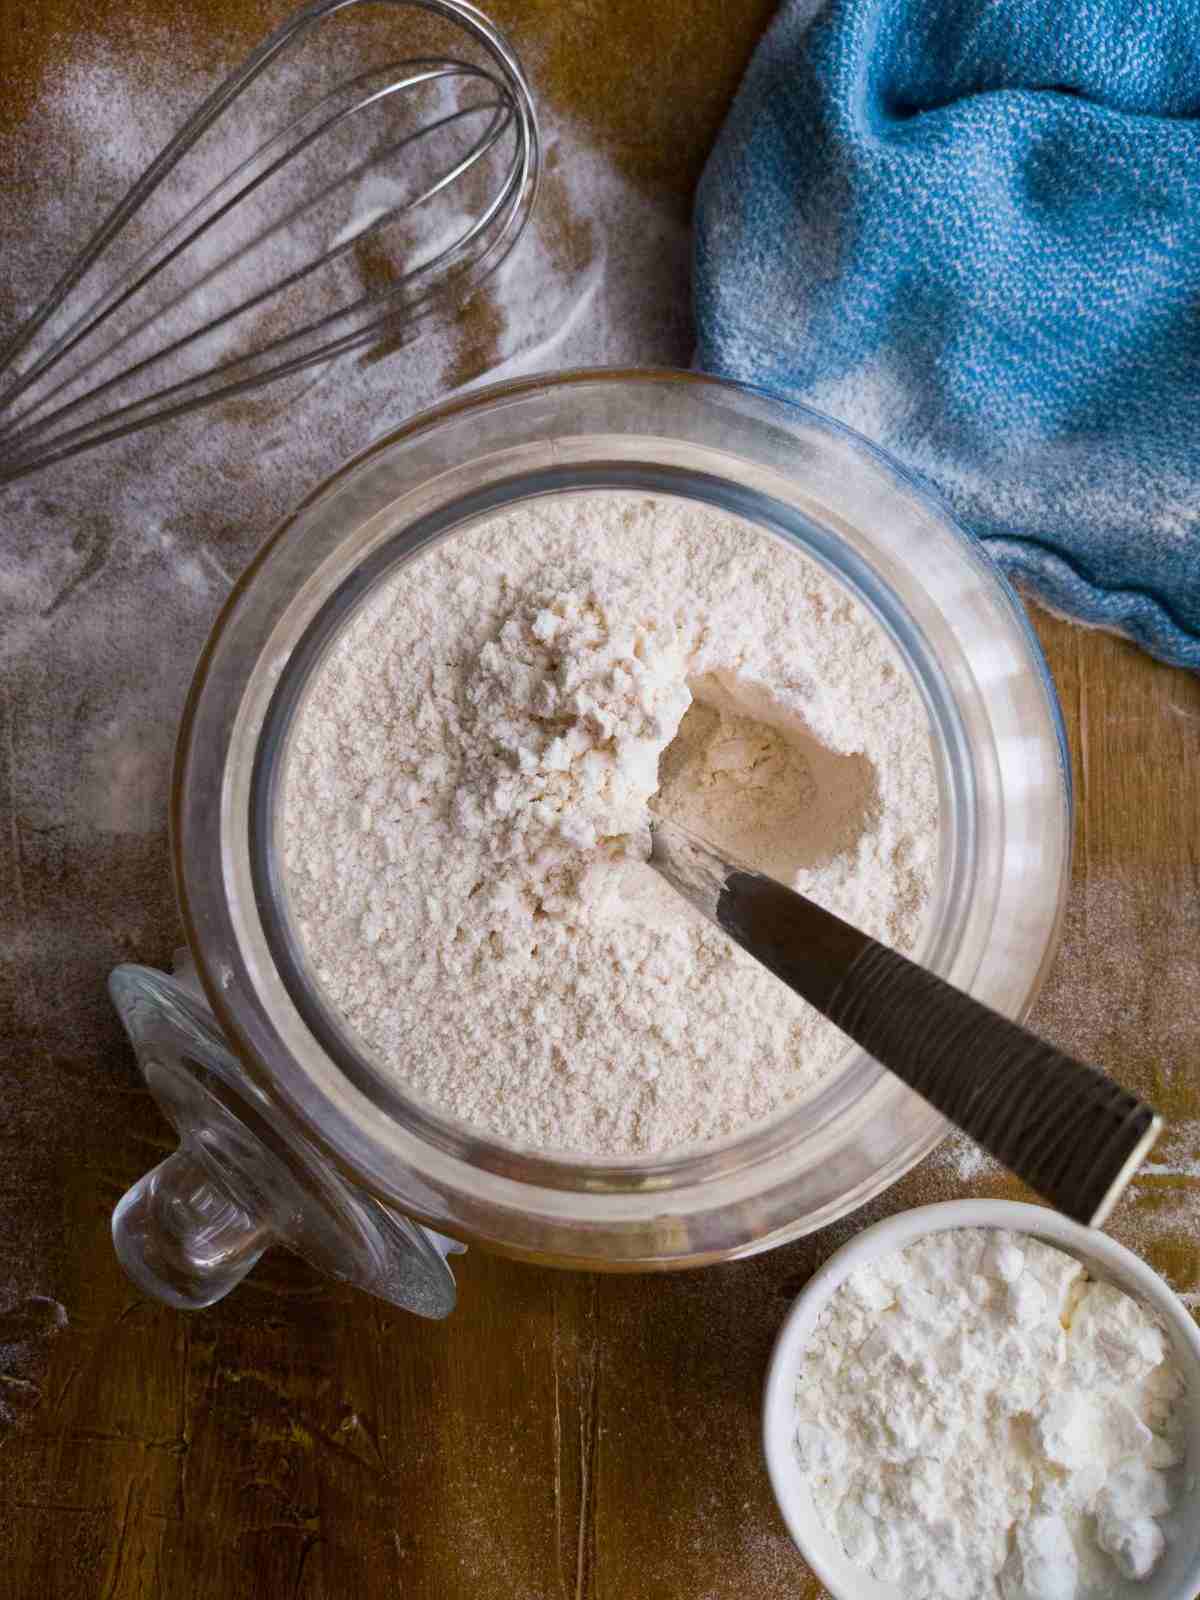 Flour in a large glass jar with a spoon sticking out of it.